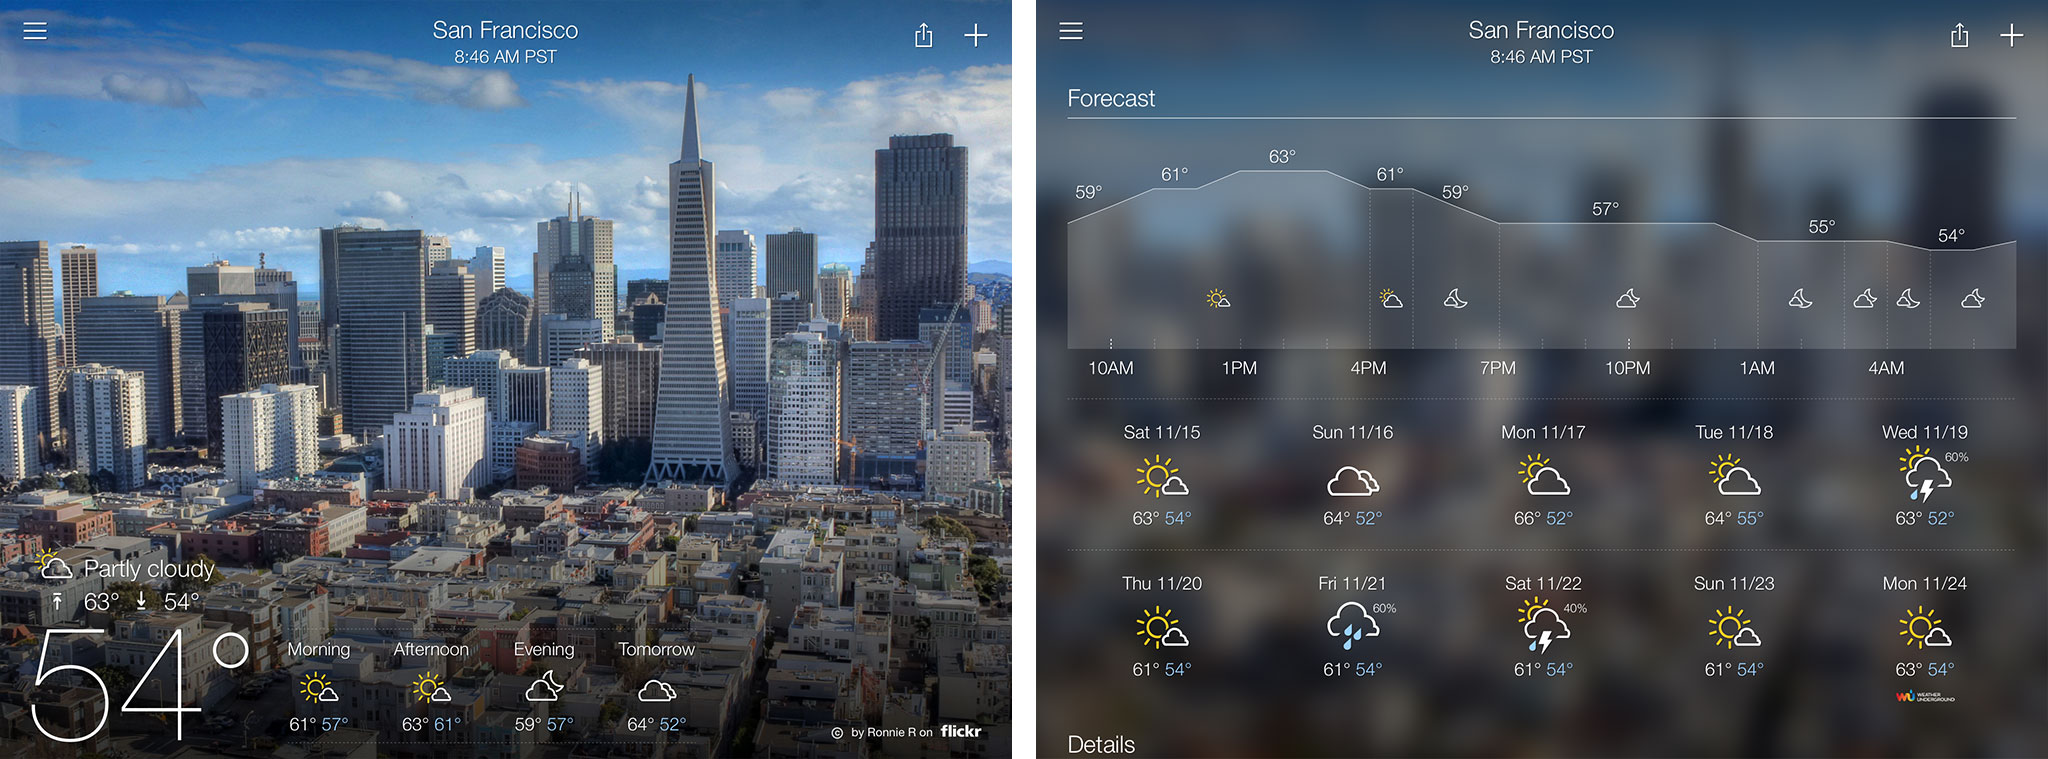 https://www.imore.com/sites/imore.com/files/styles/larger/public/field/image/2014/11/yahoo_weather_ipad_air_best_apps_screens.jpg?itok=eI-jTLfD